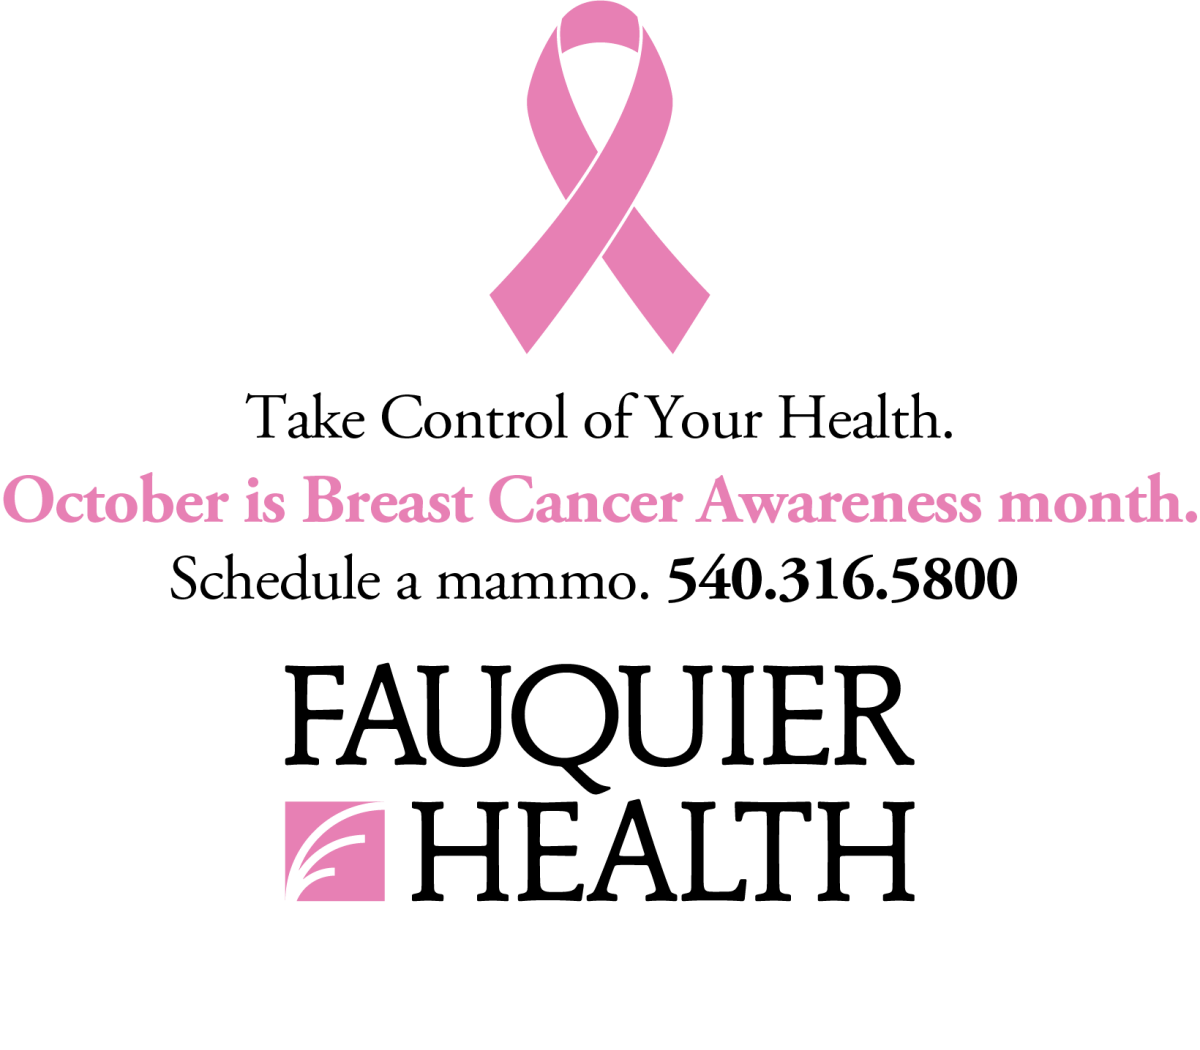 Take control of your health. October is Breast Cancer Awareness Month. Schedule a mammo. Call 540.316.5800.